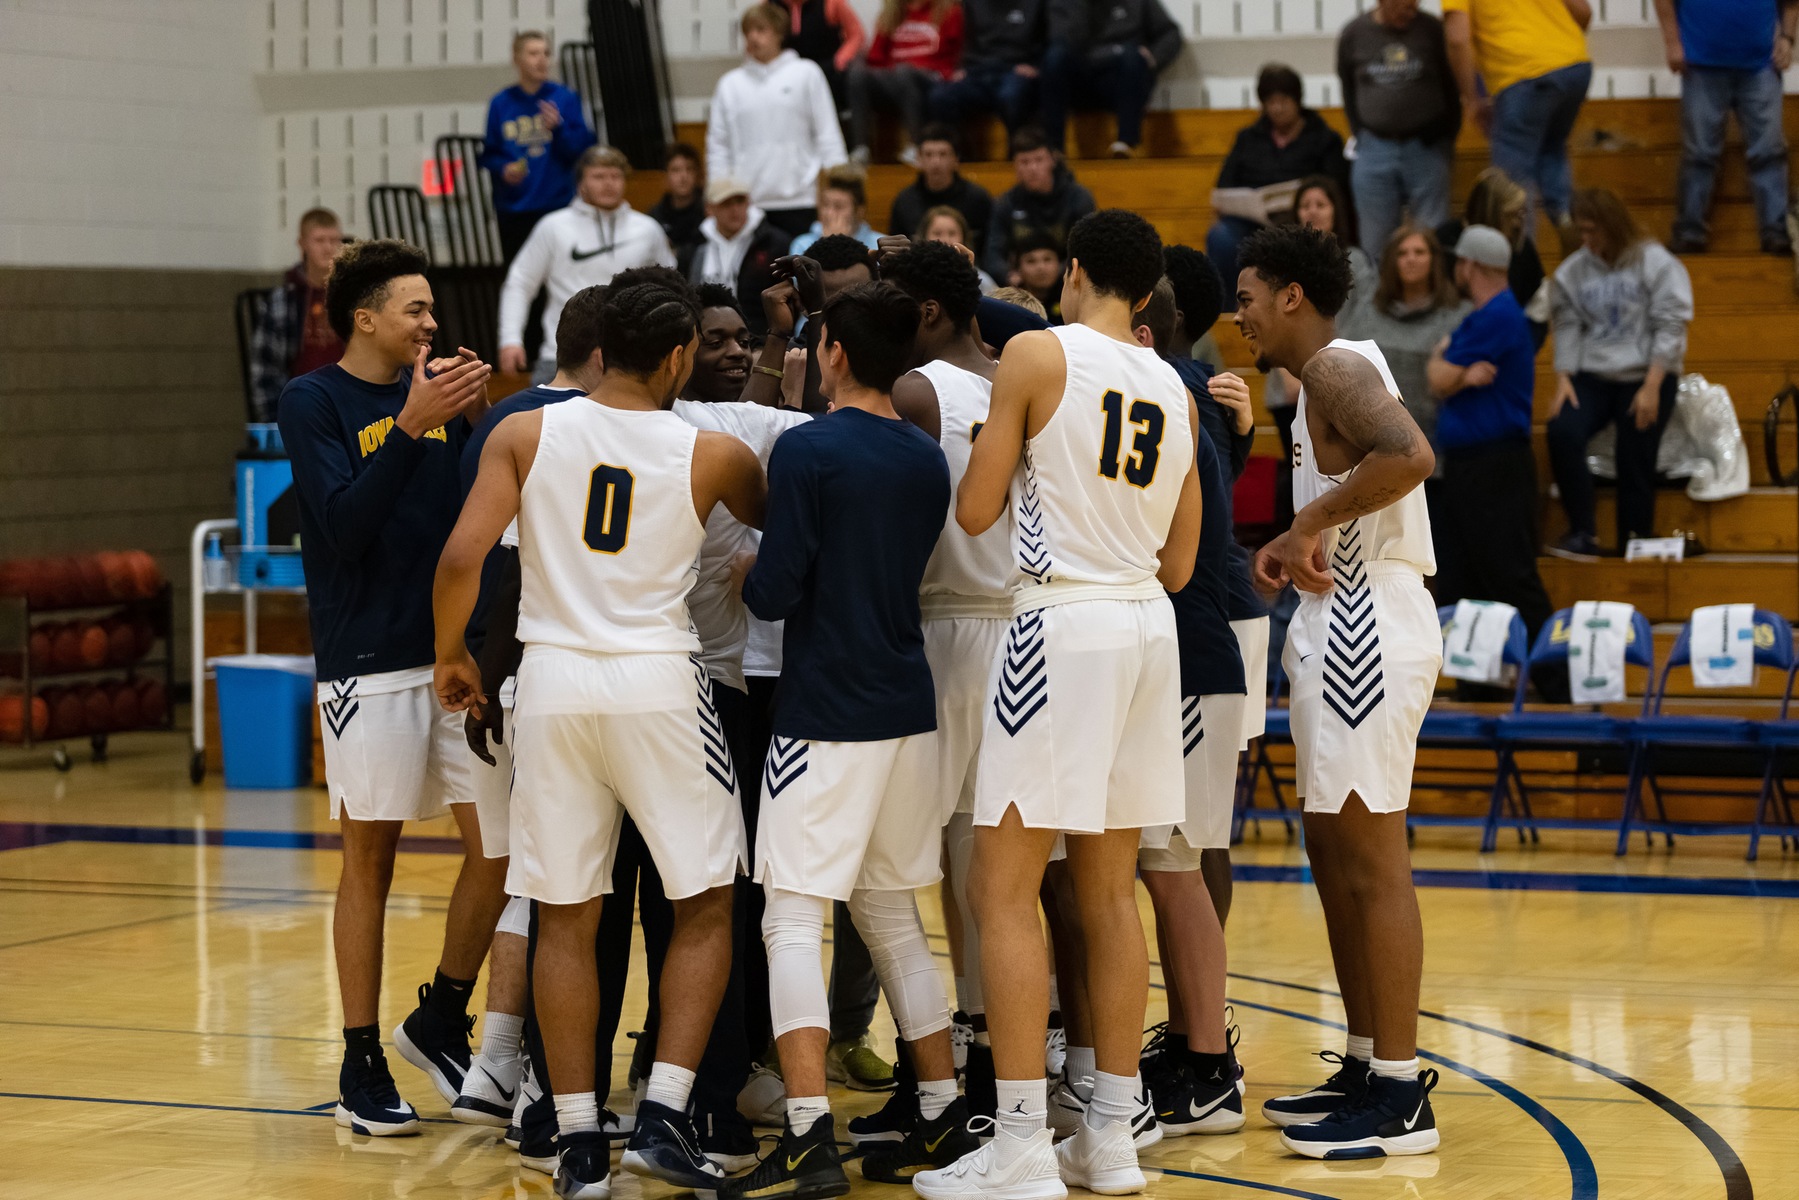 Lakers move to 7th in NJCAA Polls